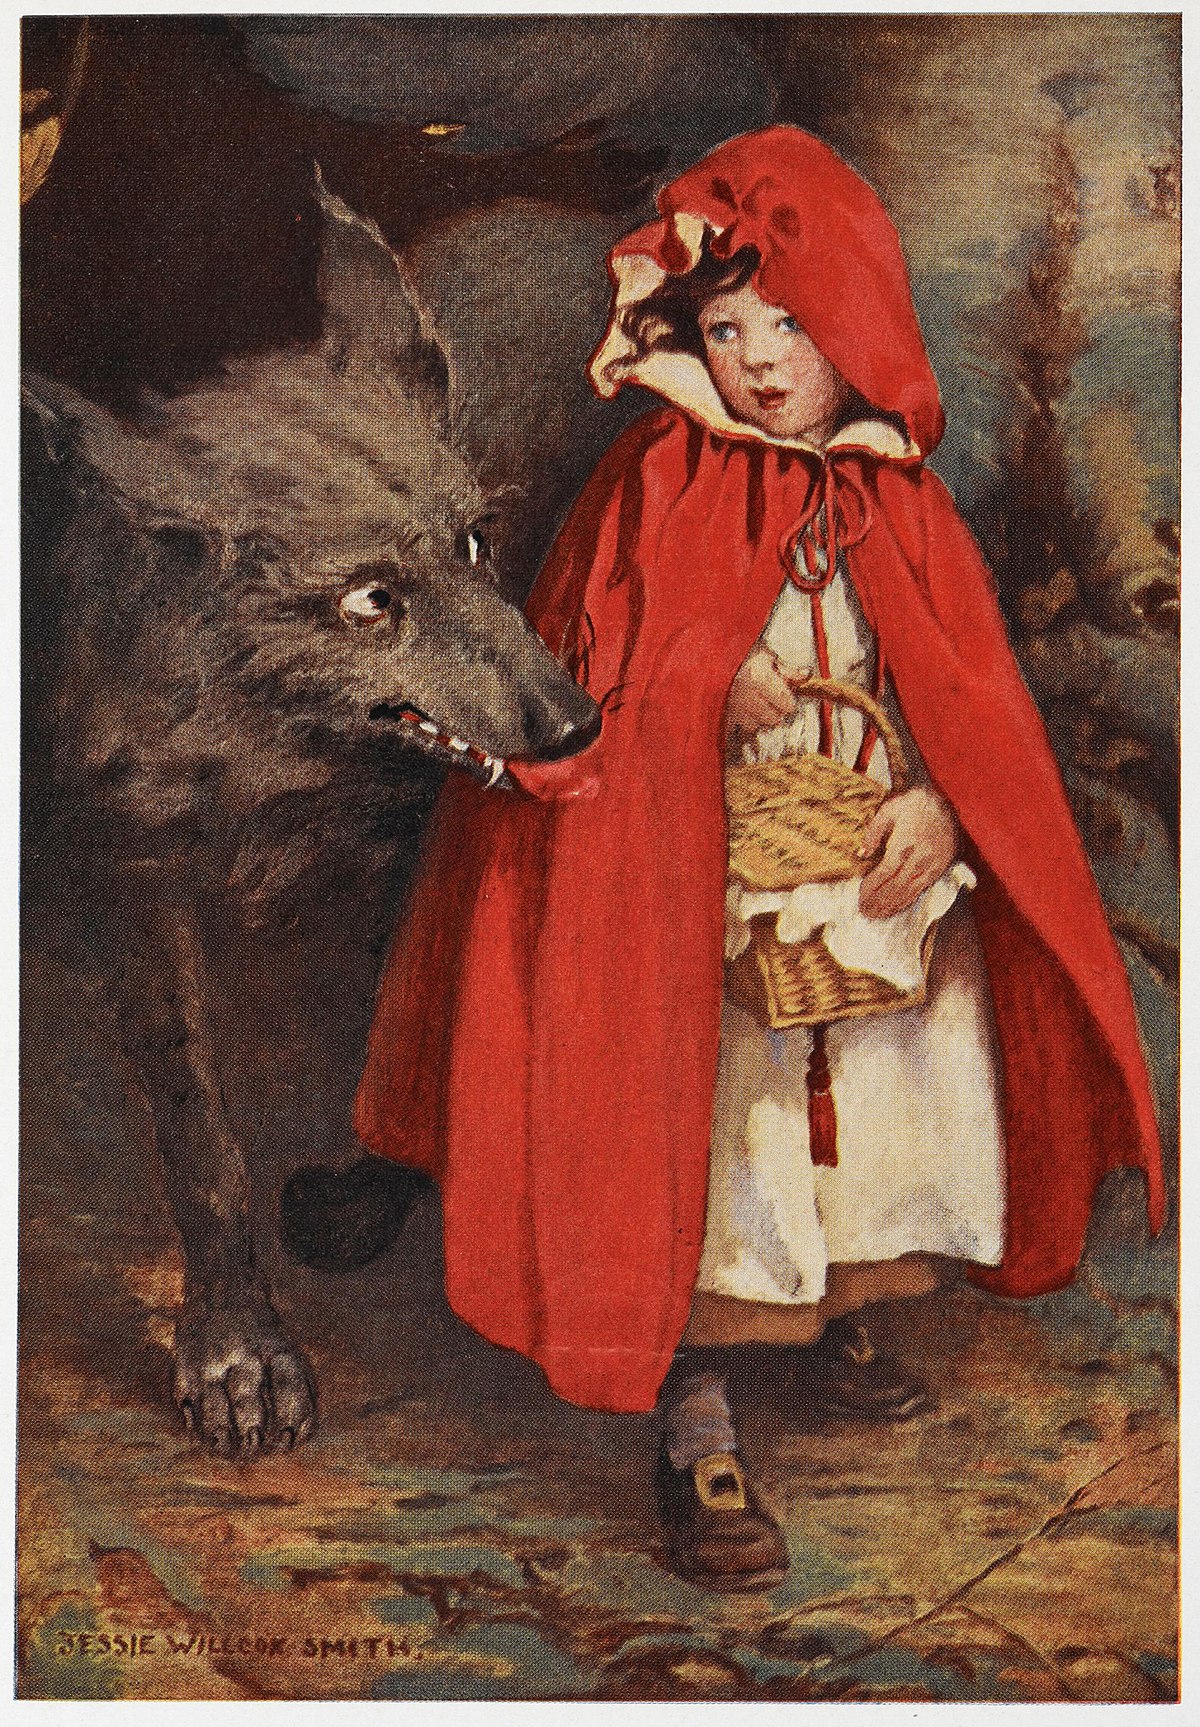 Big red riding hood and the little wolf